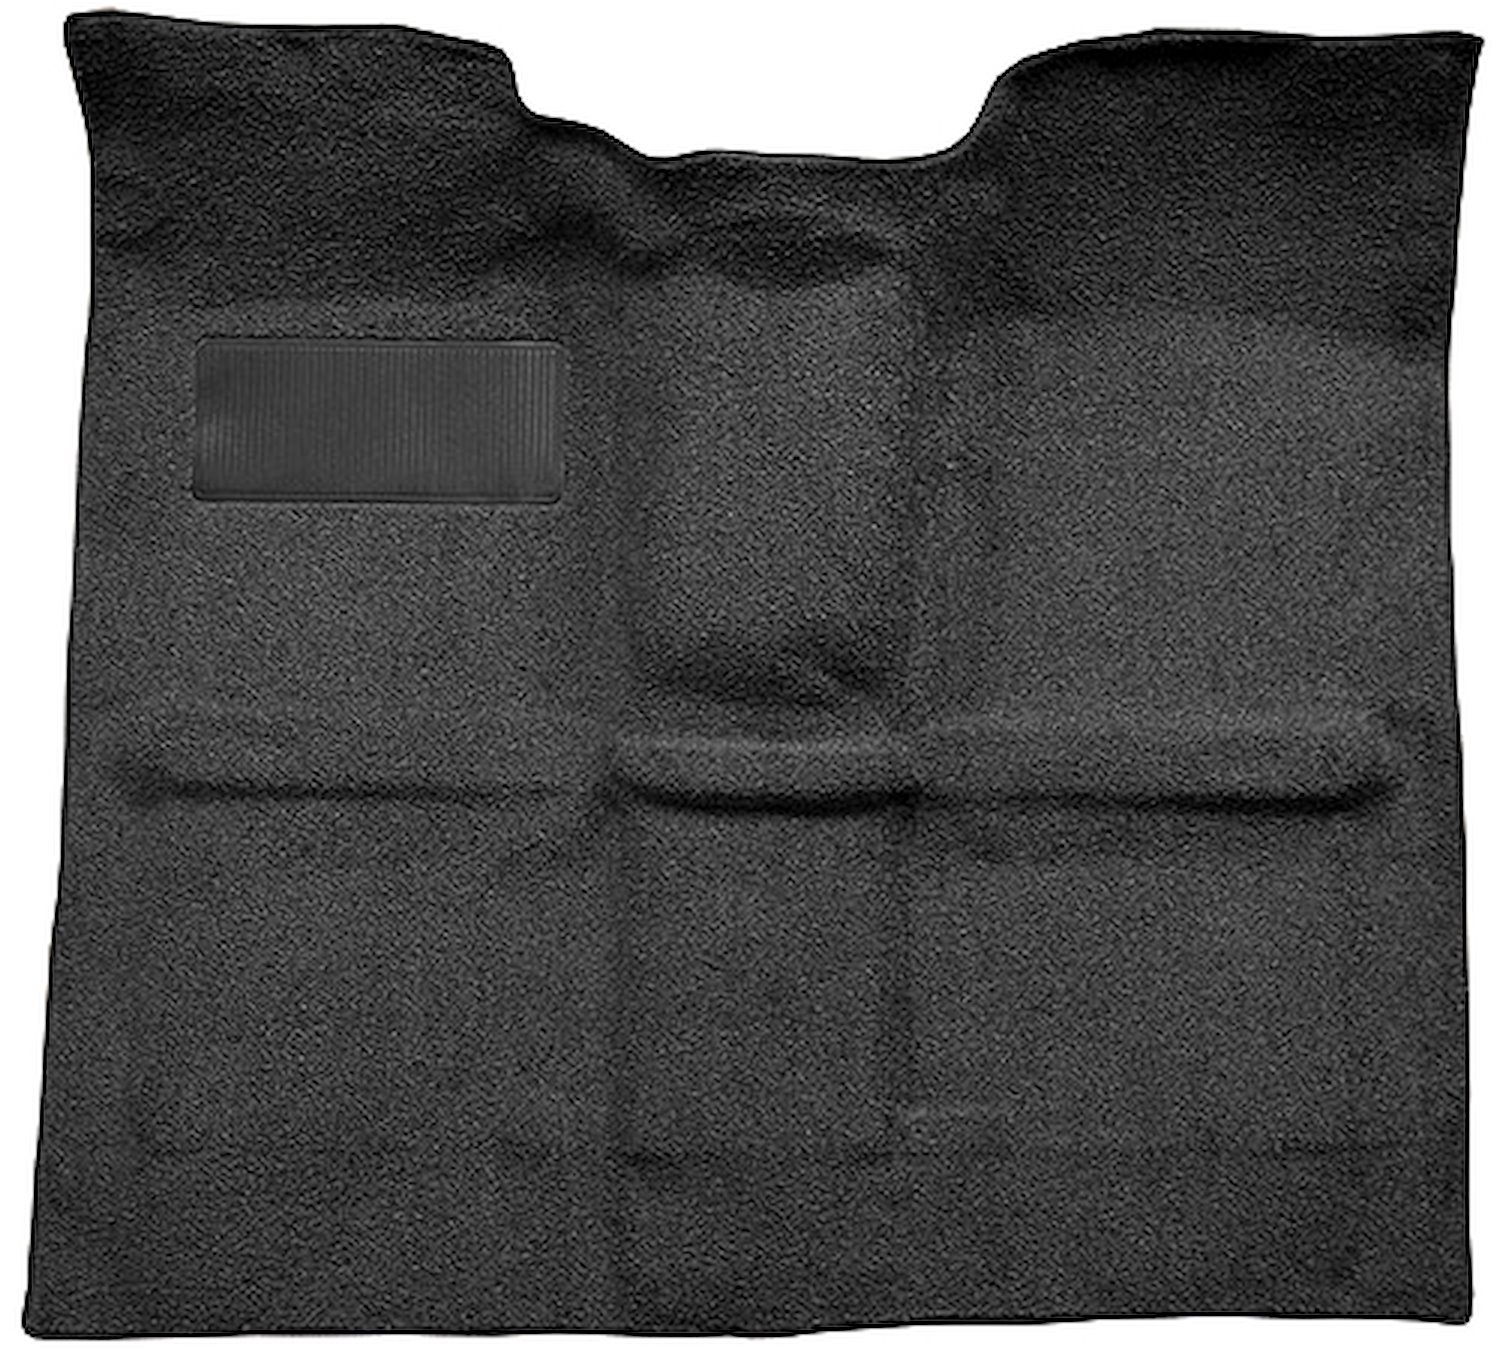 Molded Loop Carpet for 1967-1972 GM C Series Regular Cab Truck  w/o Gas Tank in Cab, 4-Speed [Mass, Black]